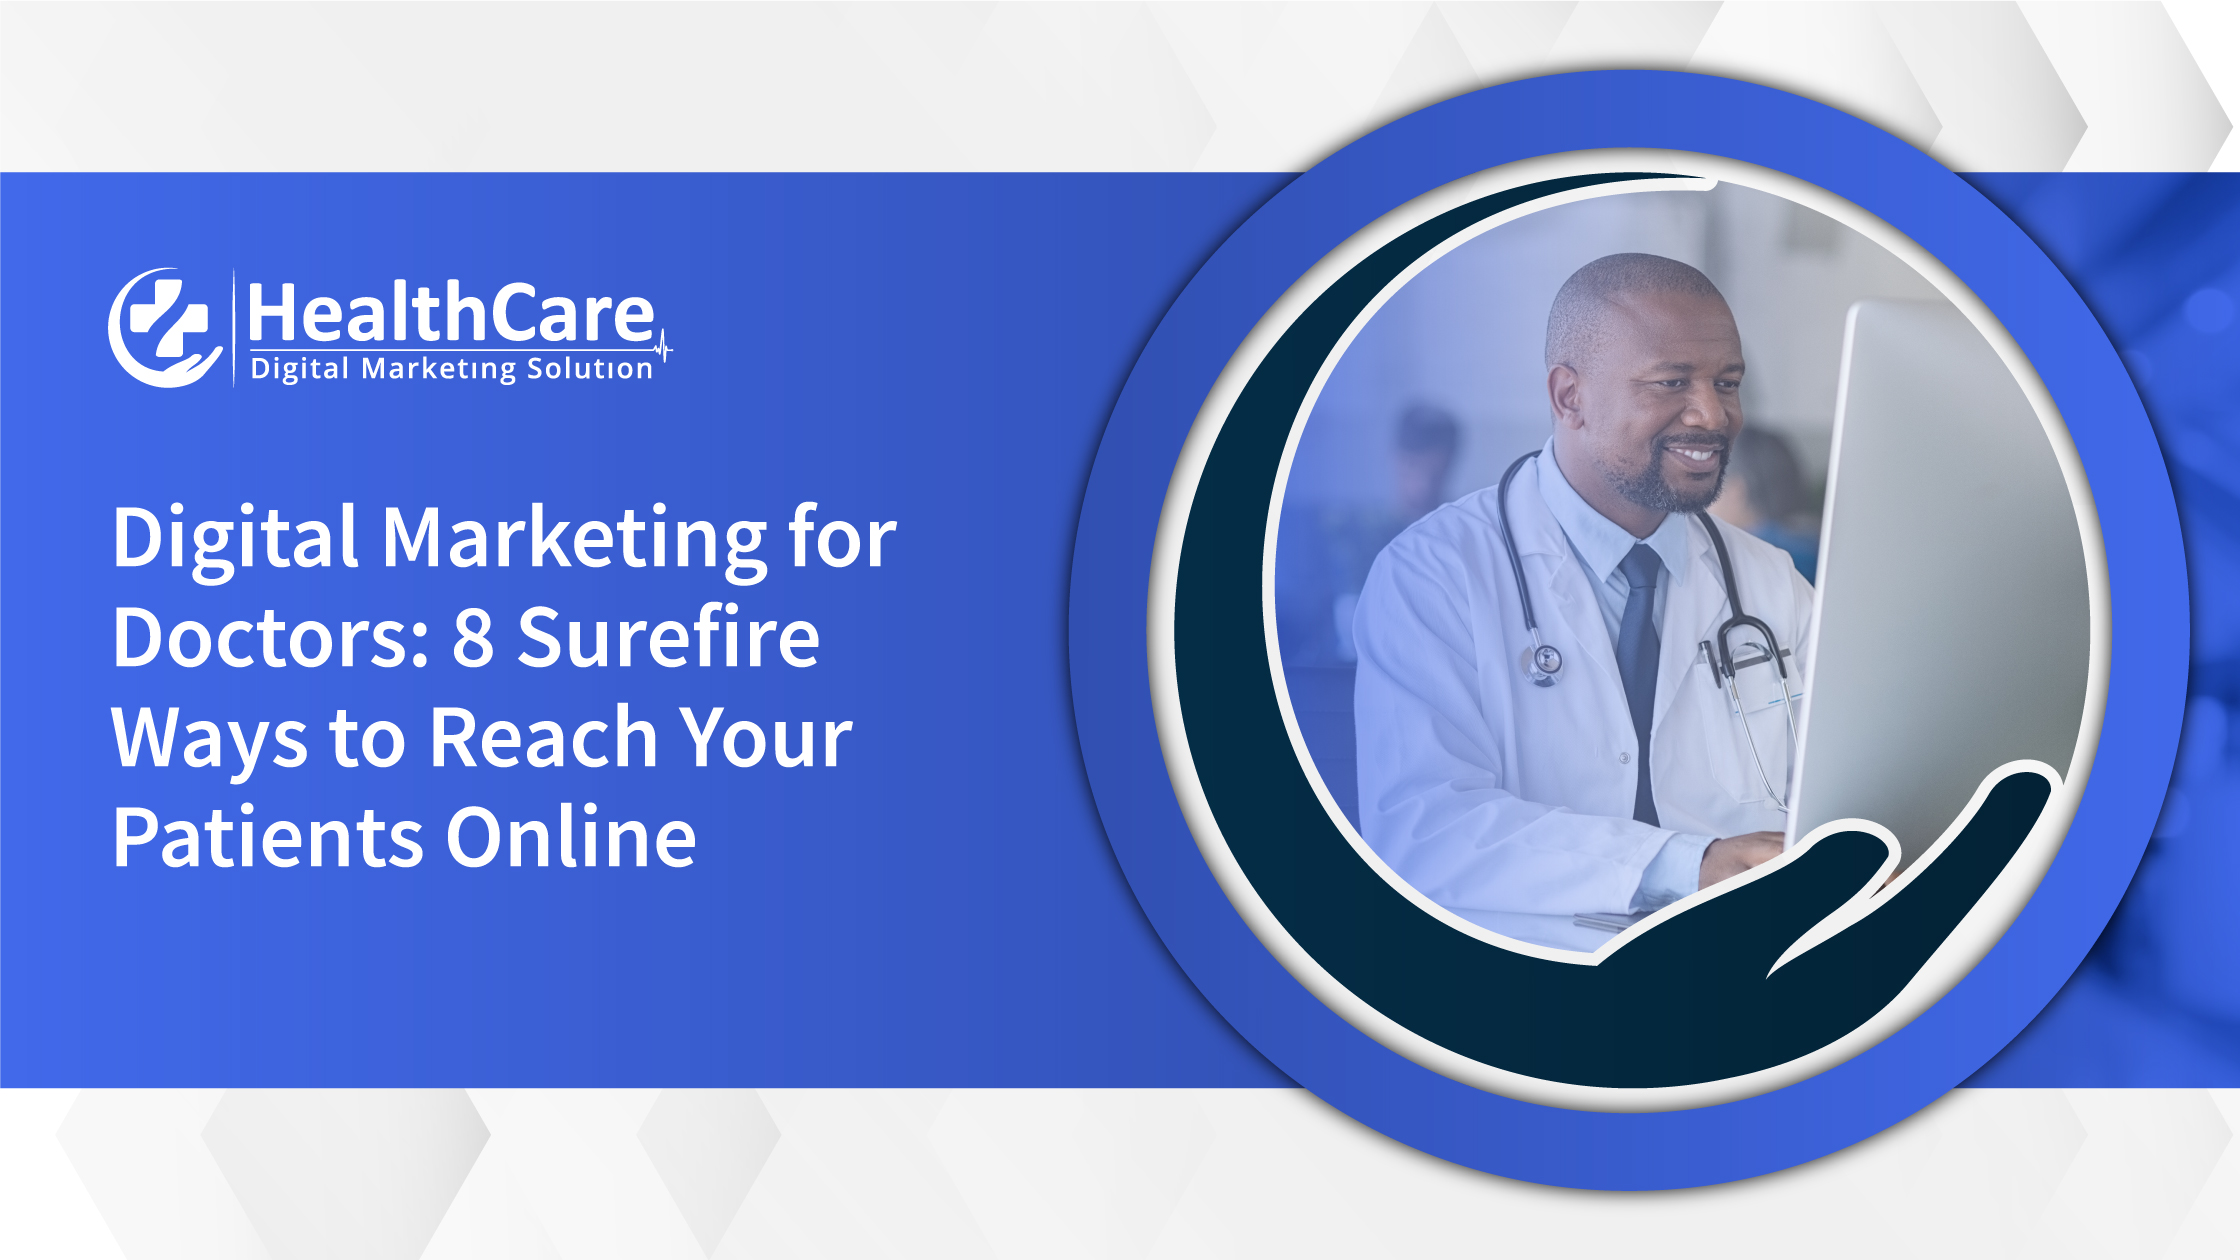 Digital Marketing for Doctors in India: 9 Insane Ways to Reach Your Patients Online